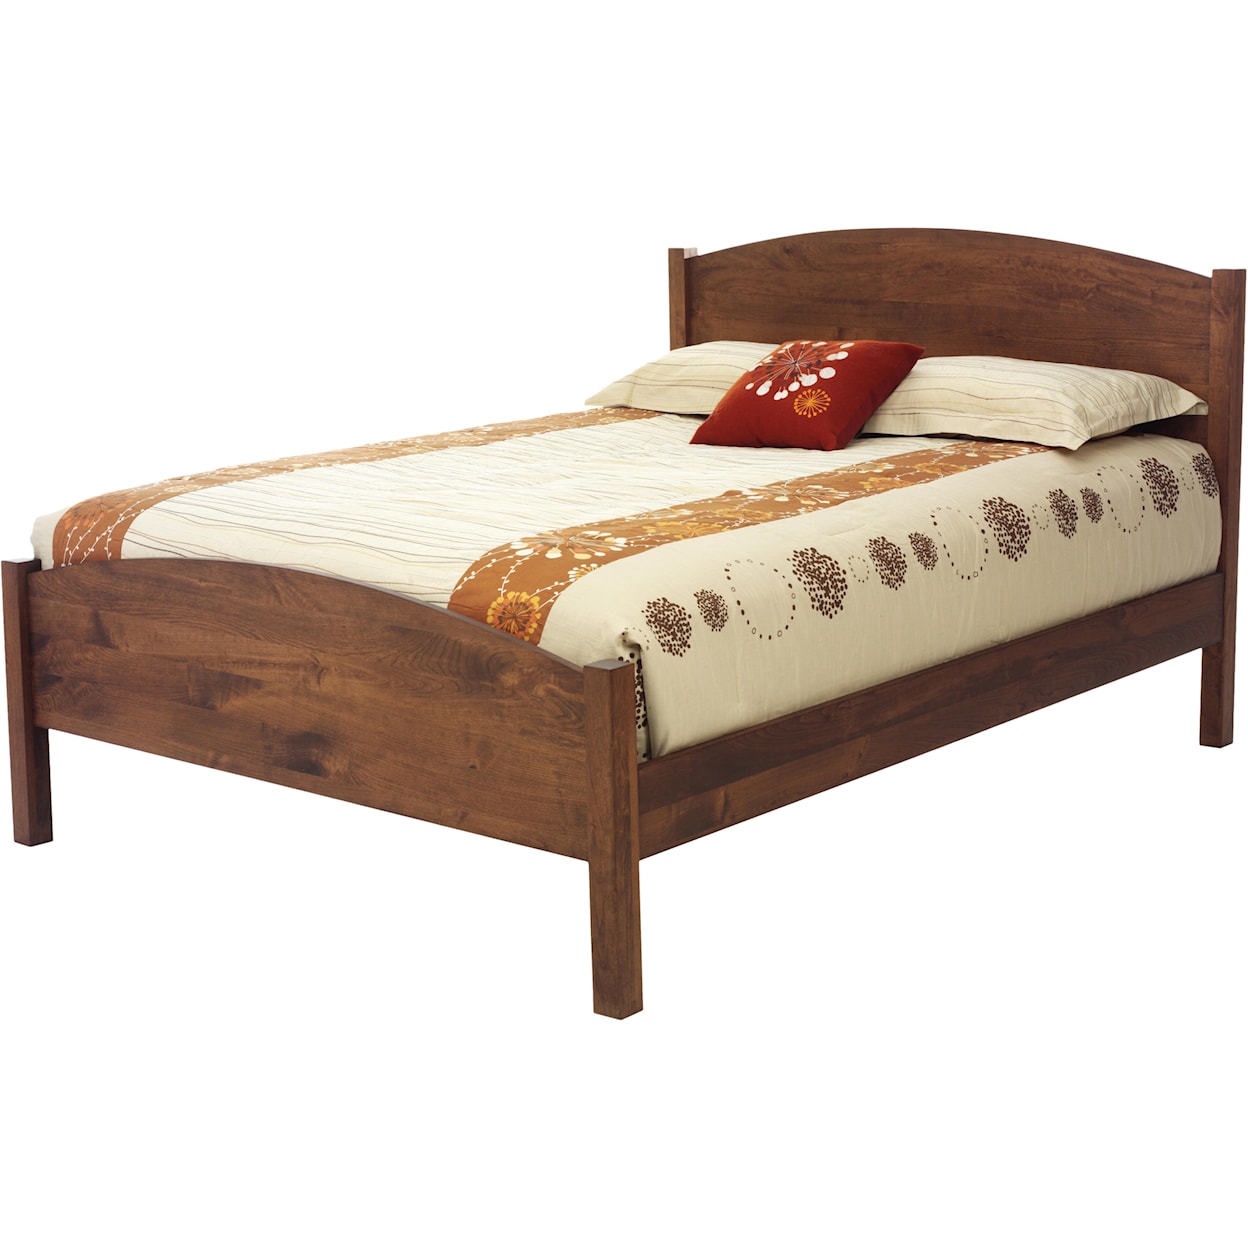 Millcraft Lynnwood Queen Eclipse Bed